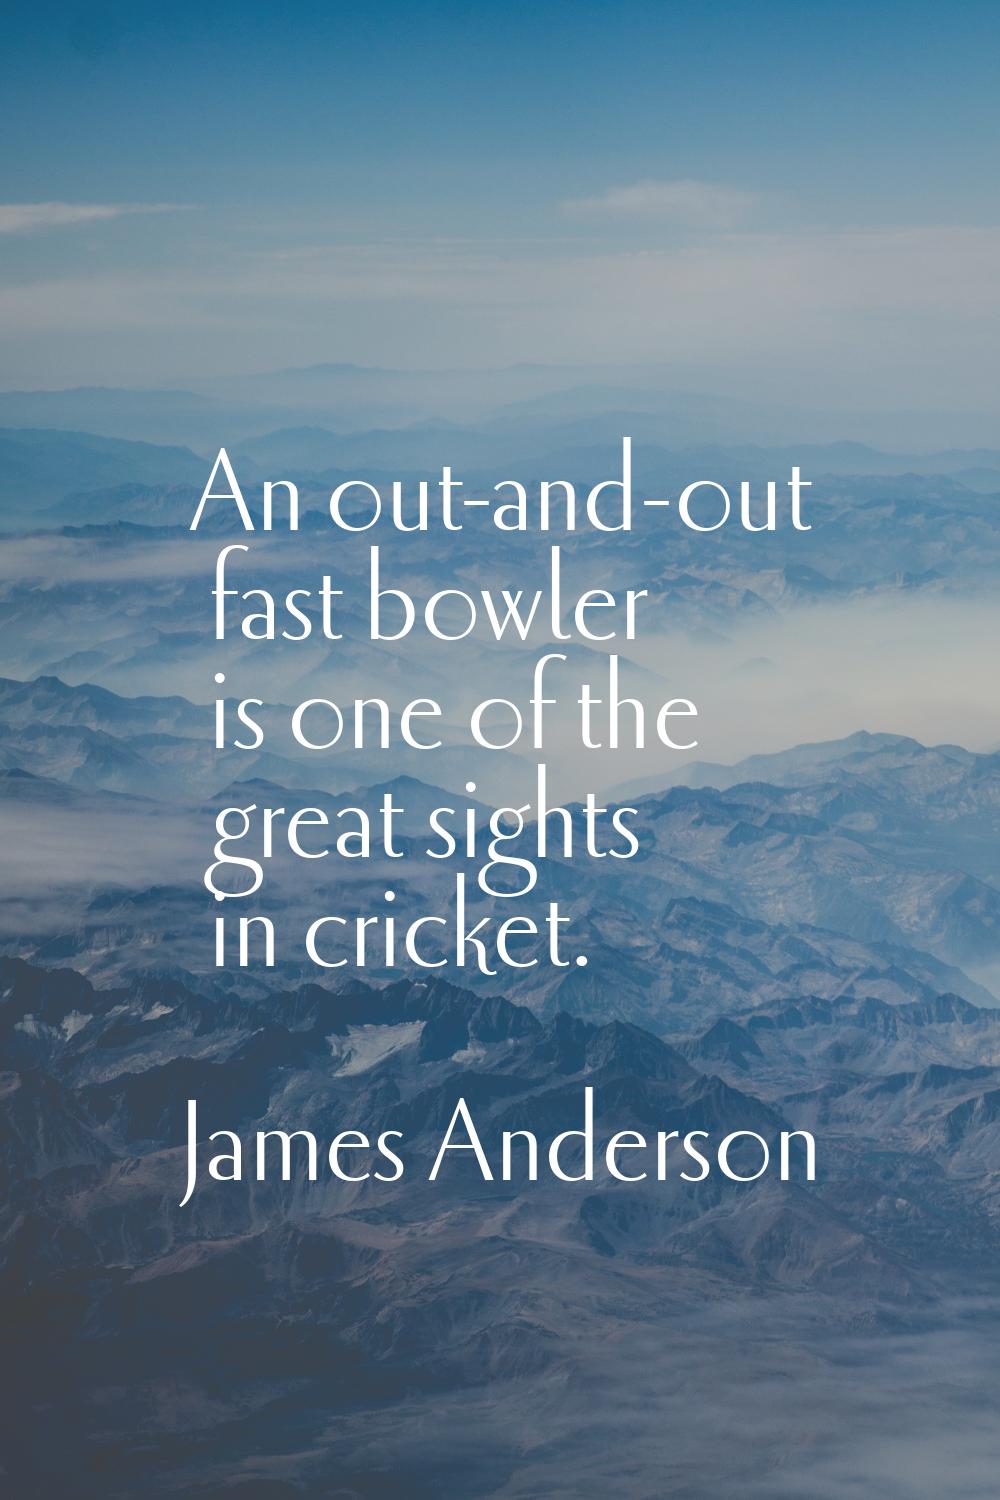 An out-and-out fast bowler is one of the great sights in cricket.